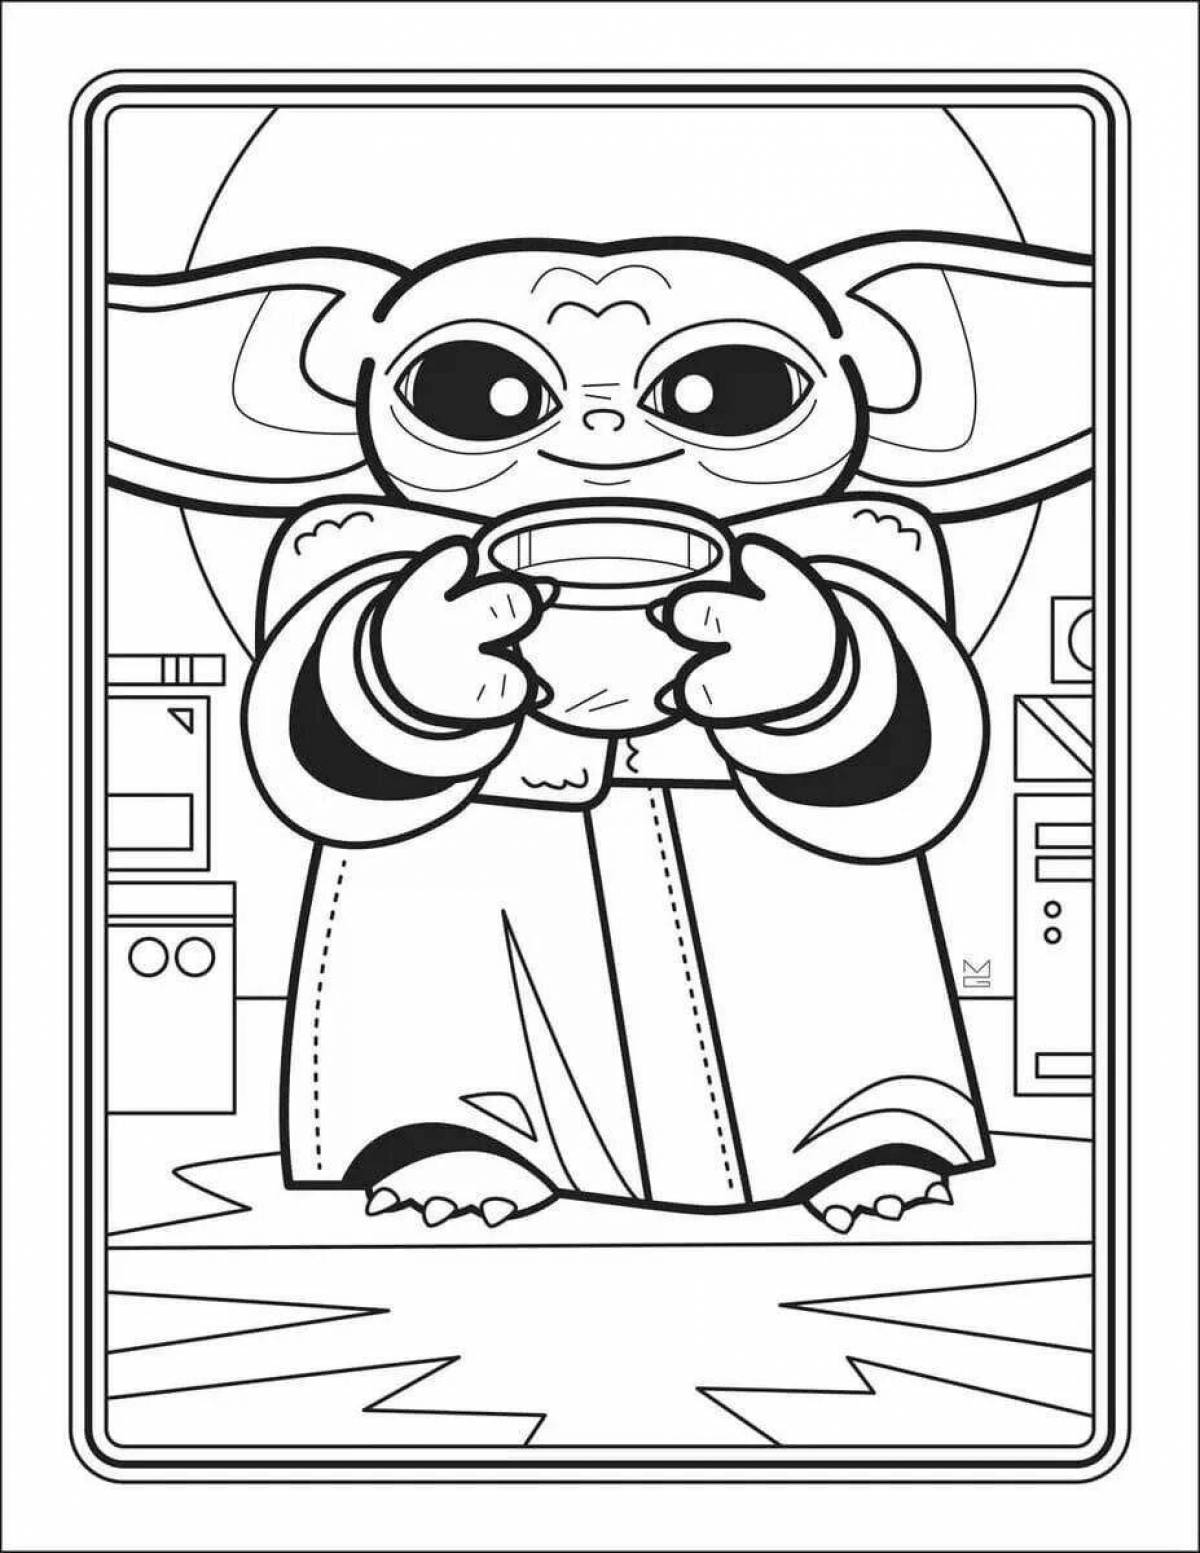 Charming yodo coloring page